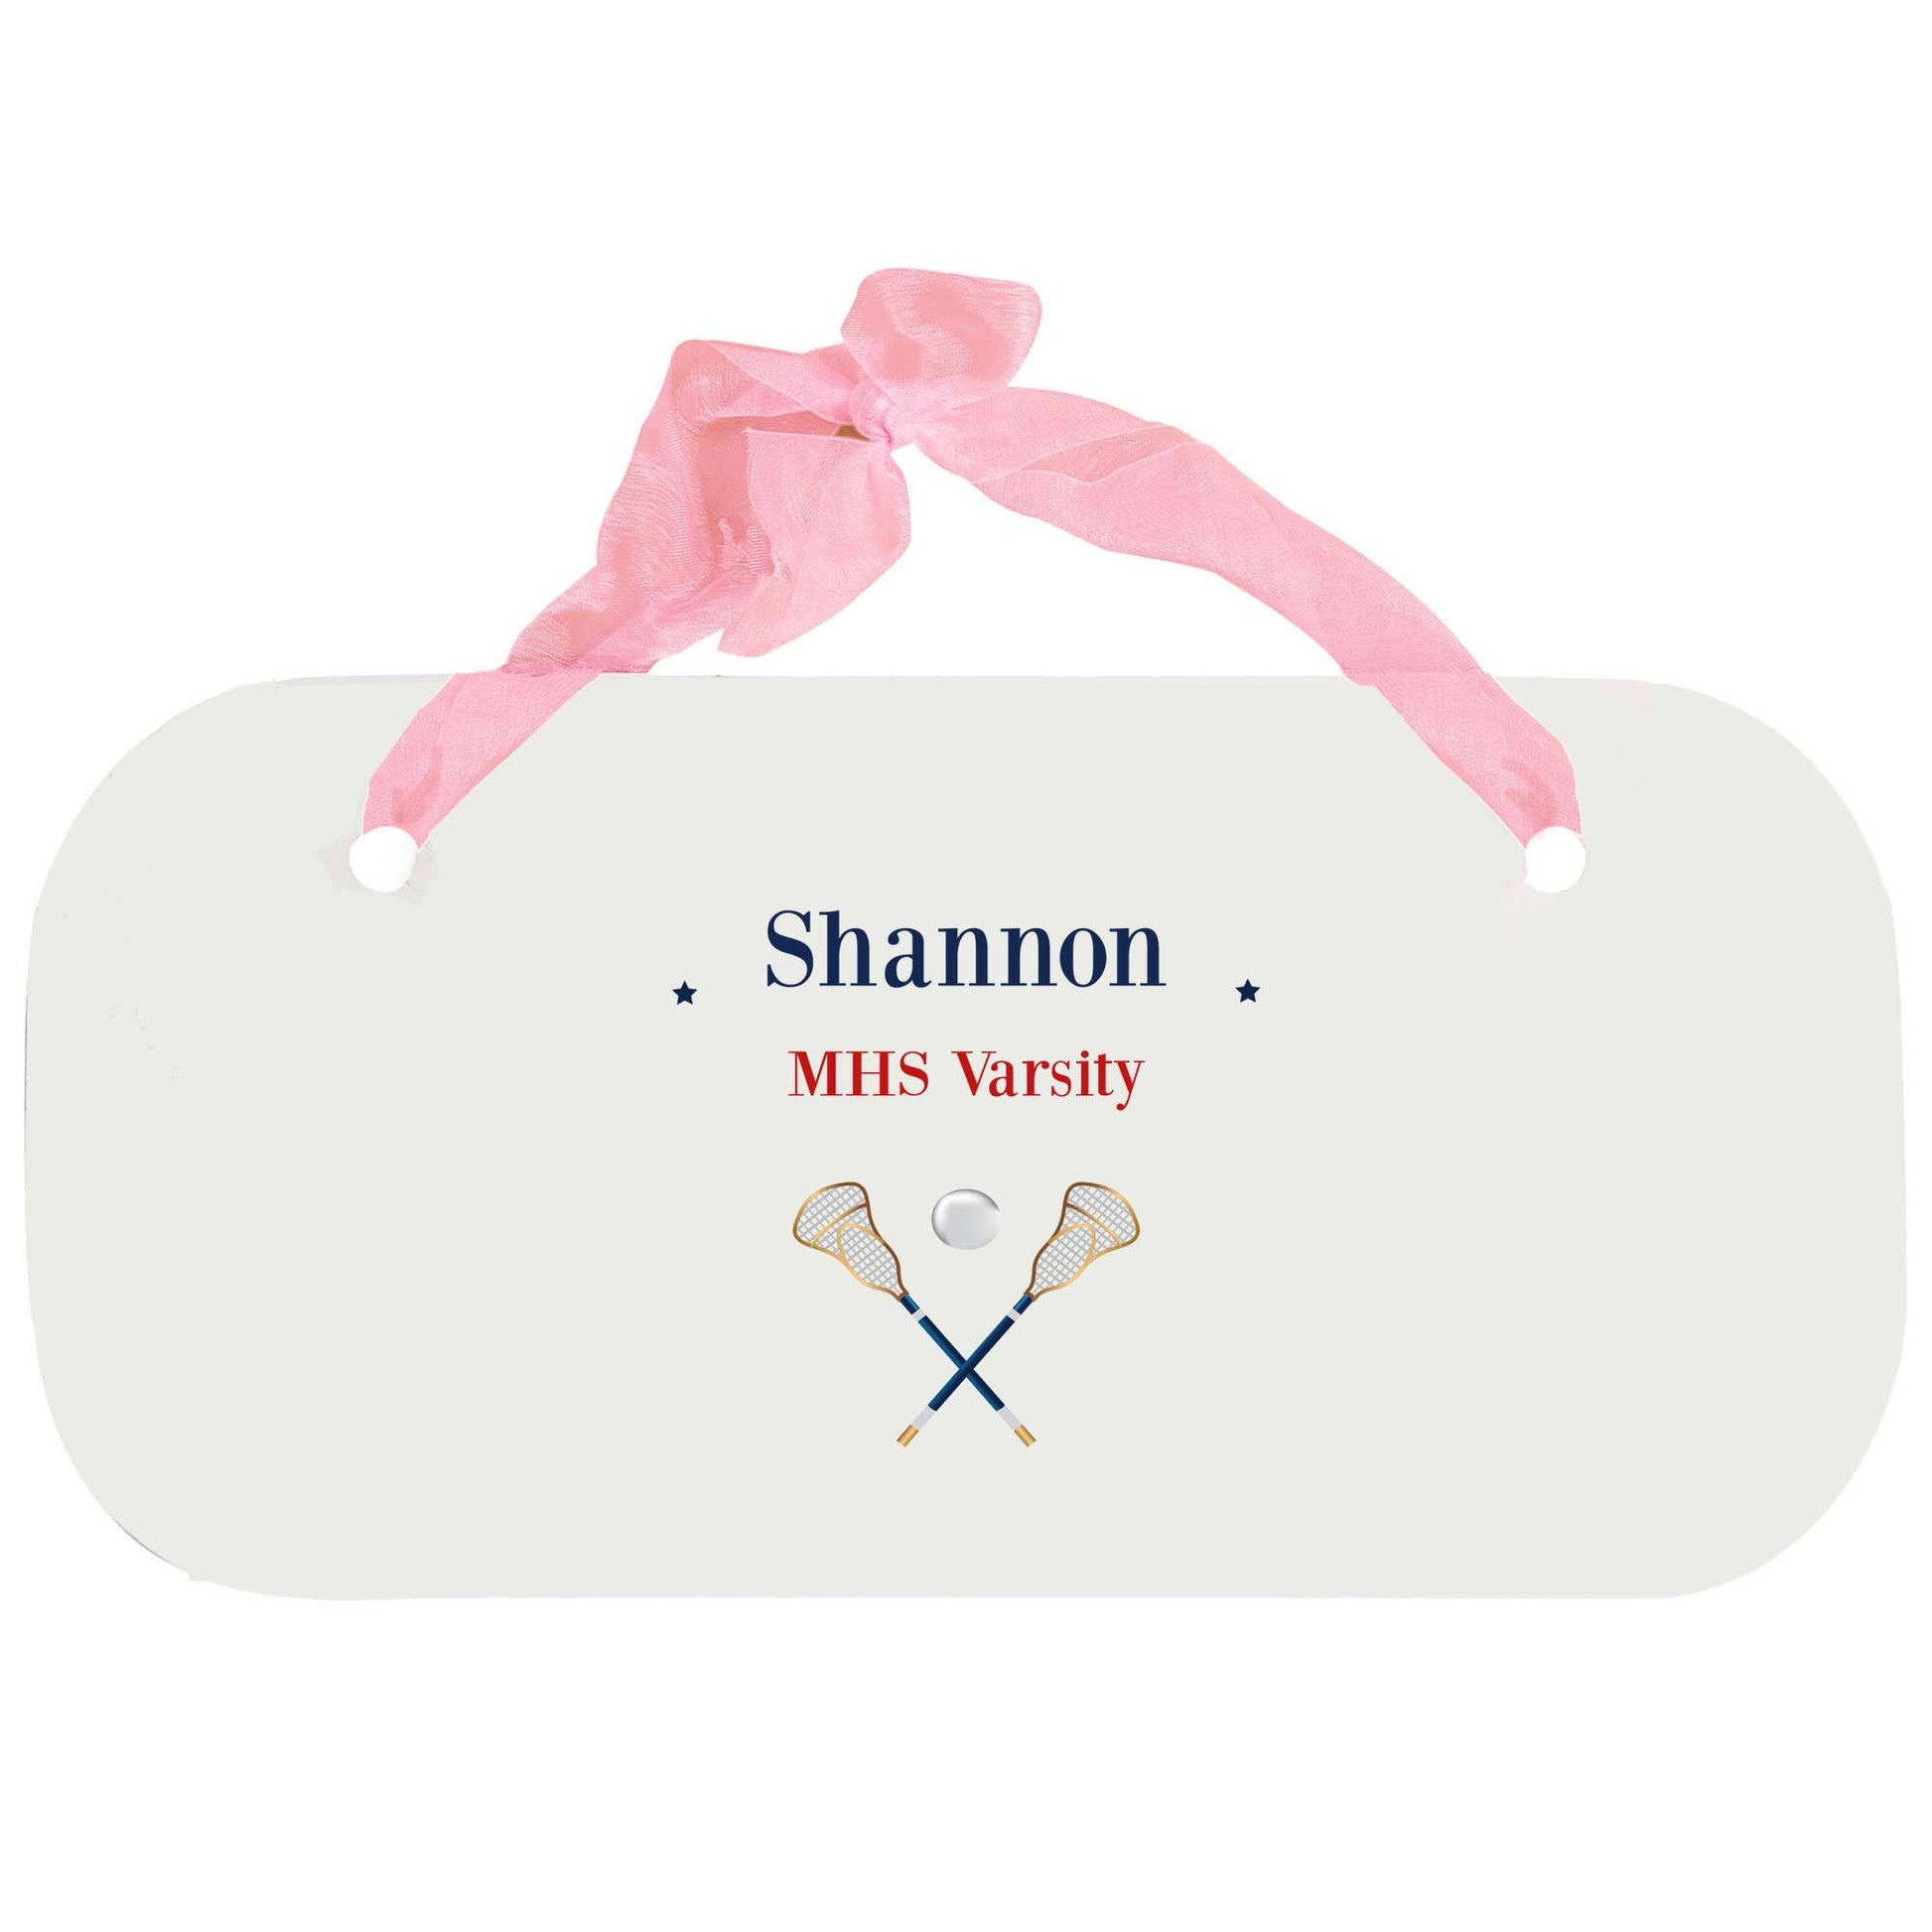 Personalized Girls Wall Plaque with Lacrosse Sticks design